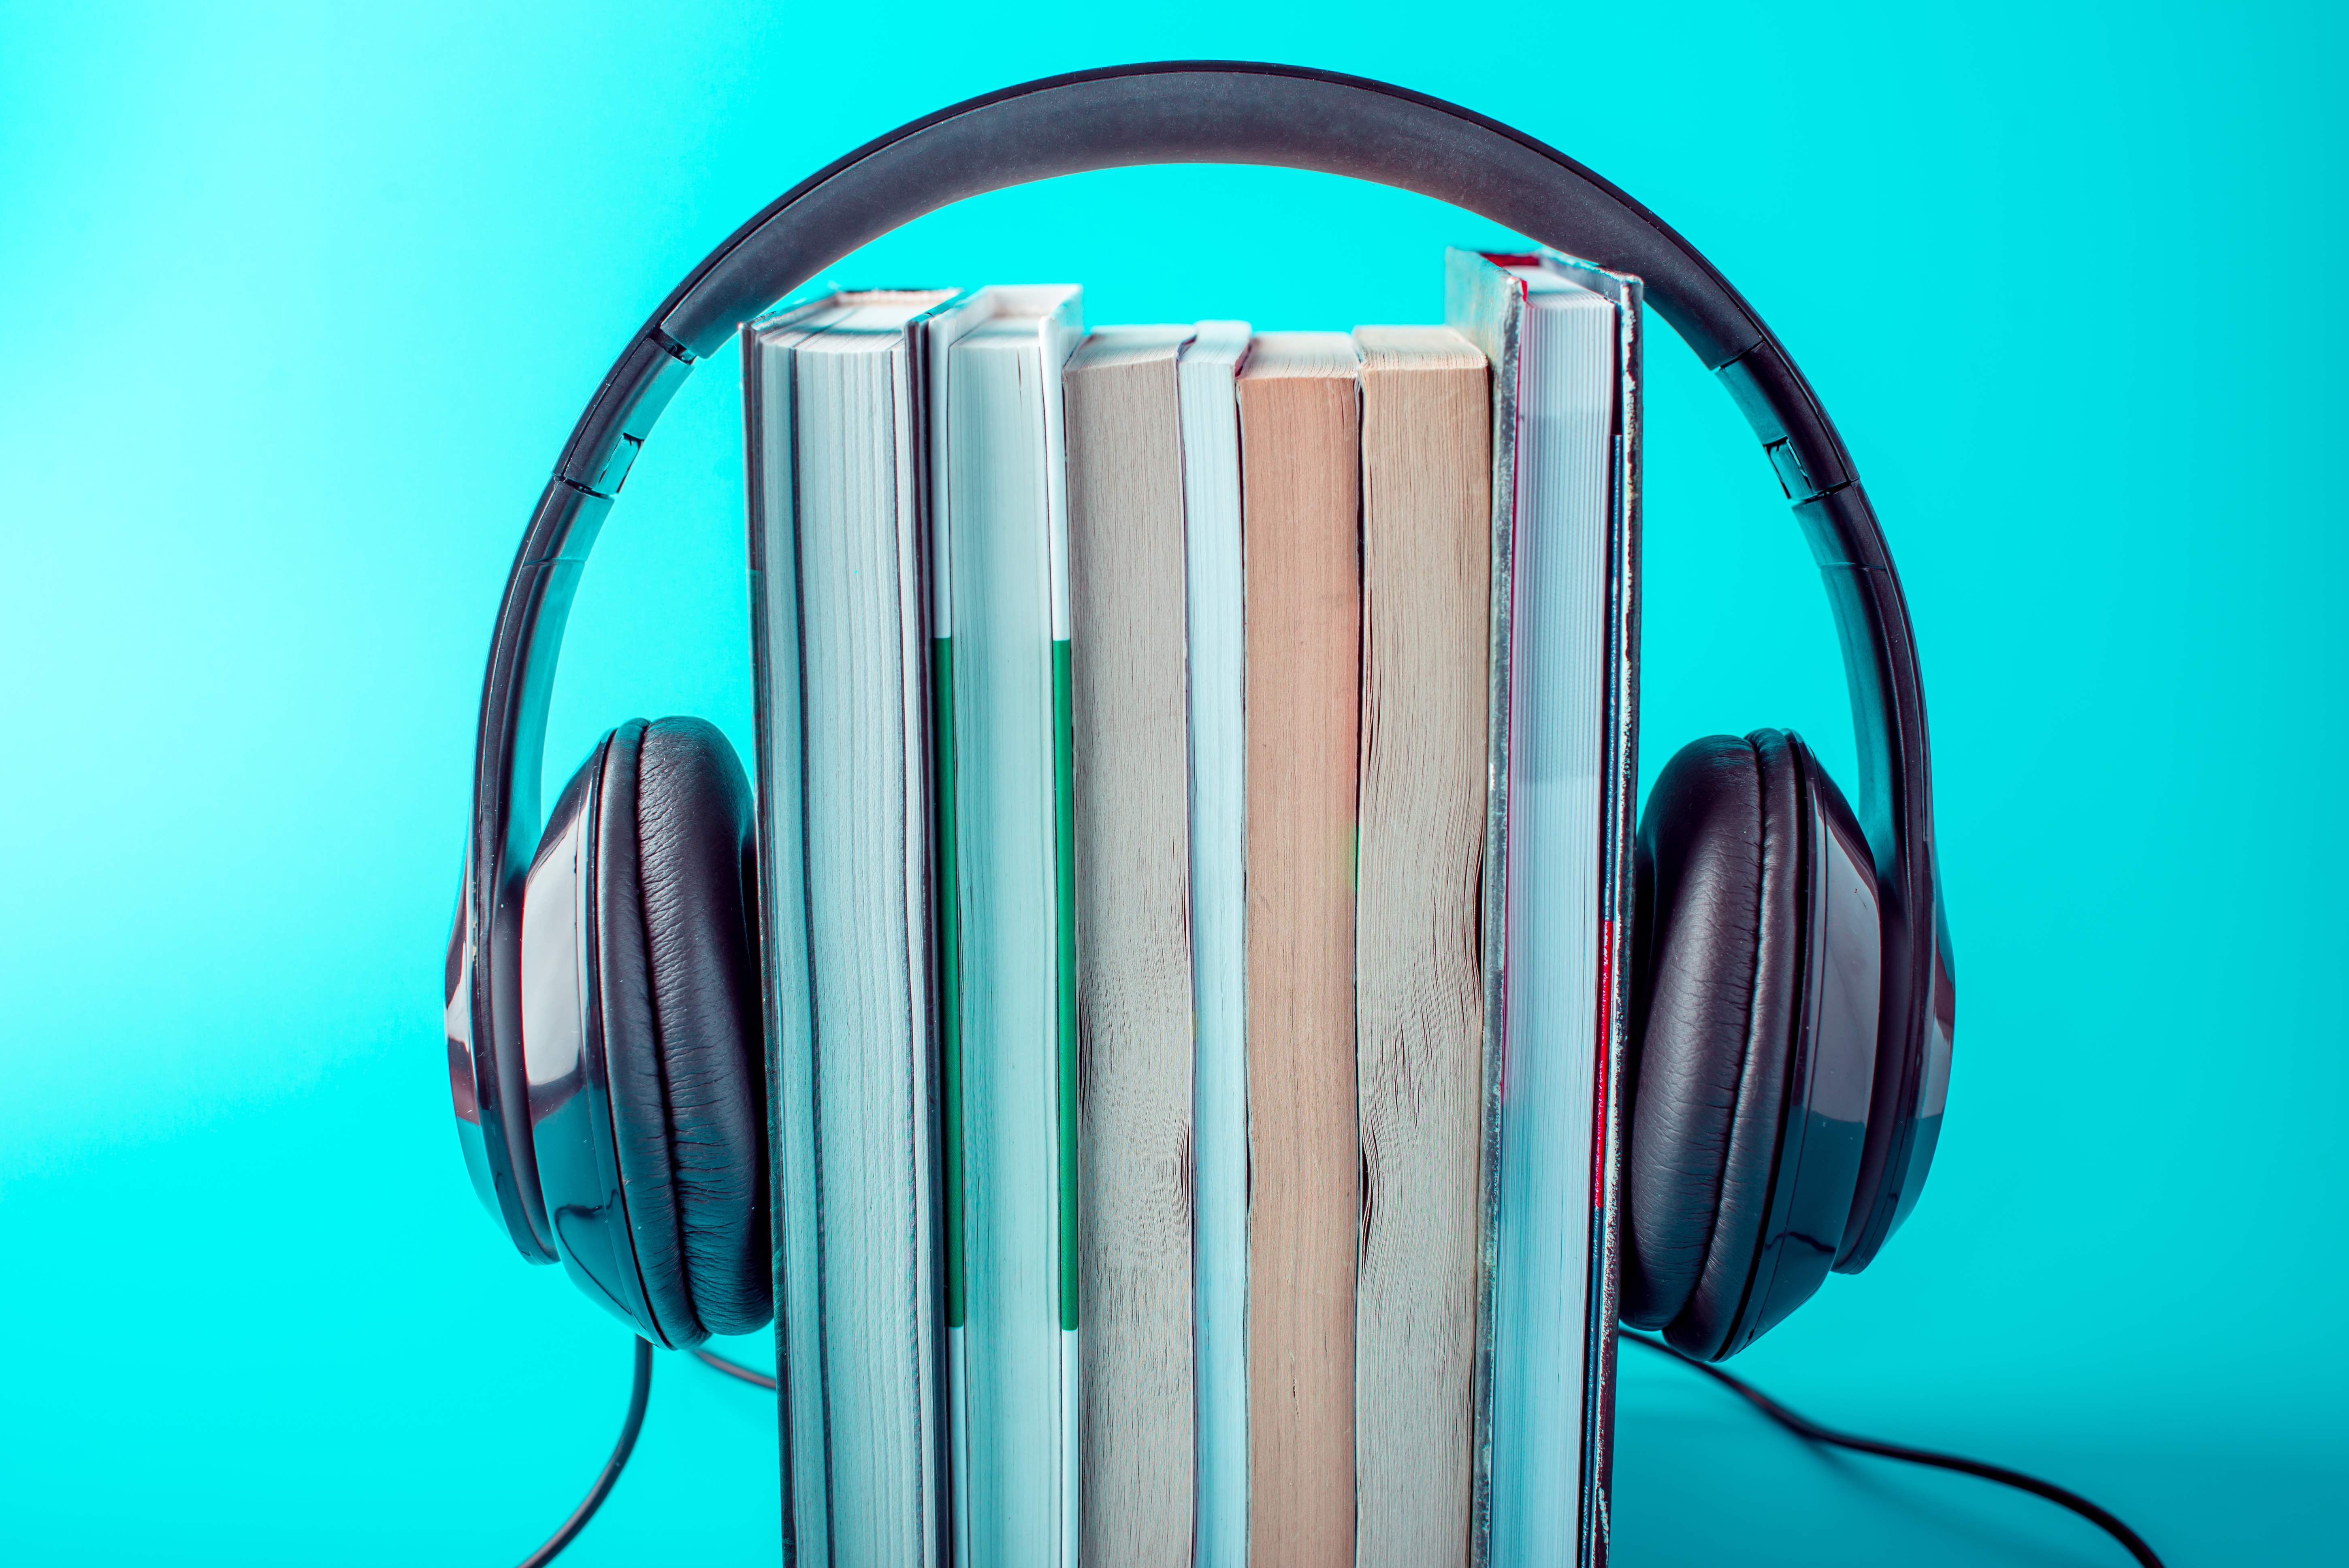 Is it better to read or listen to books?